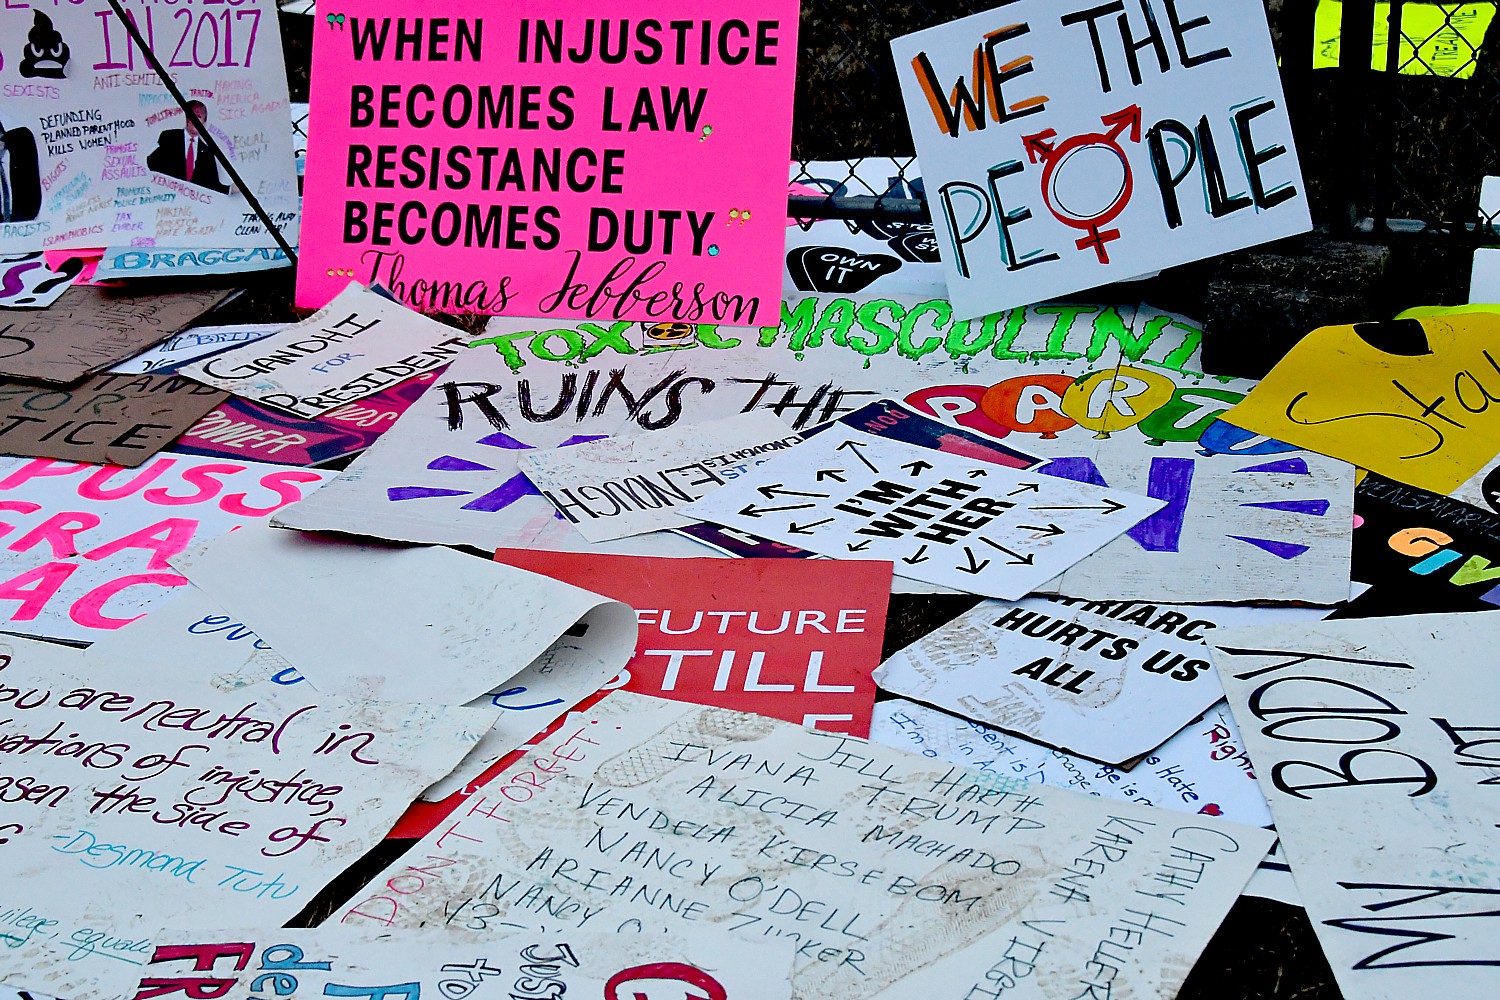 When injustice becomes law, resistance becomes duty© 2017 Karen Rubin/news-photos-features.com